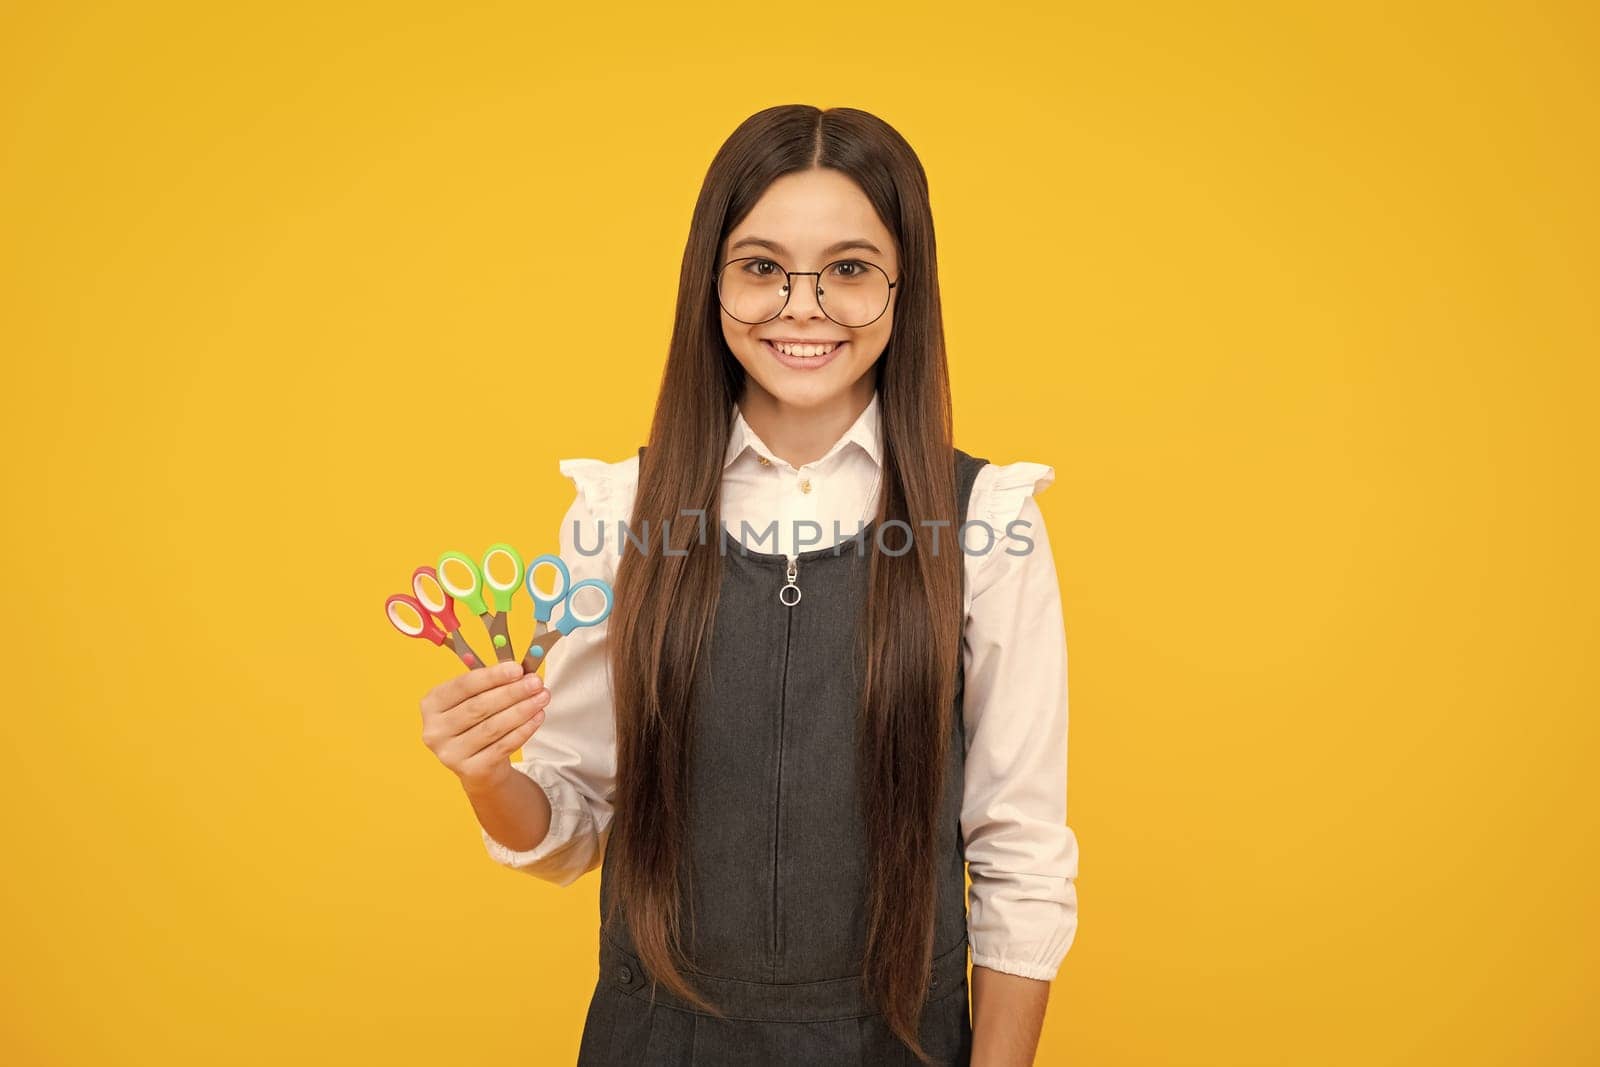 Teenage girl with scissors, isolated on yellow background. Child creativity, arts and crafts